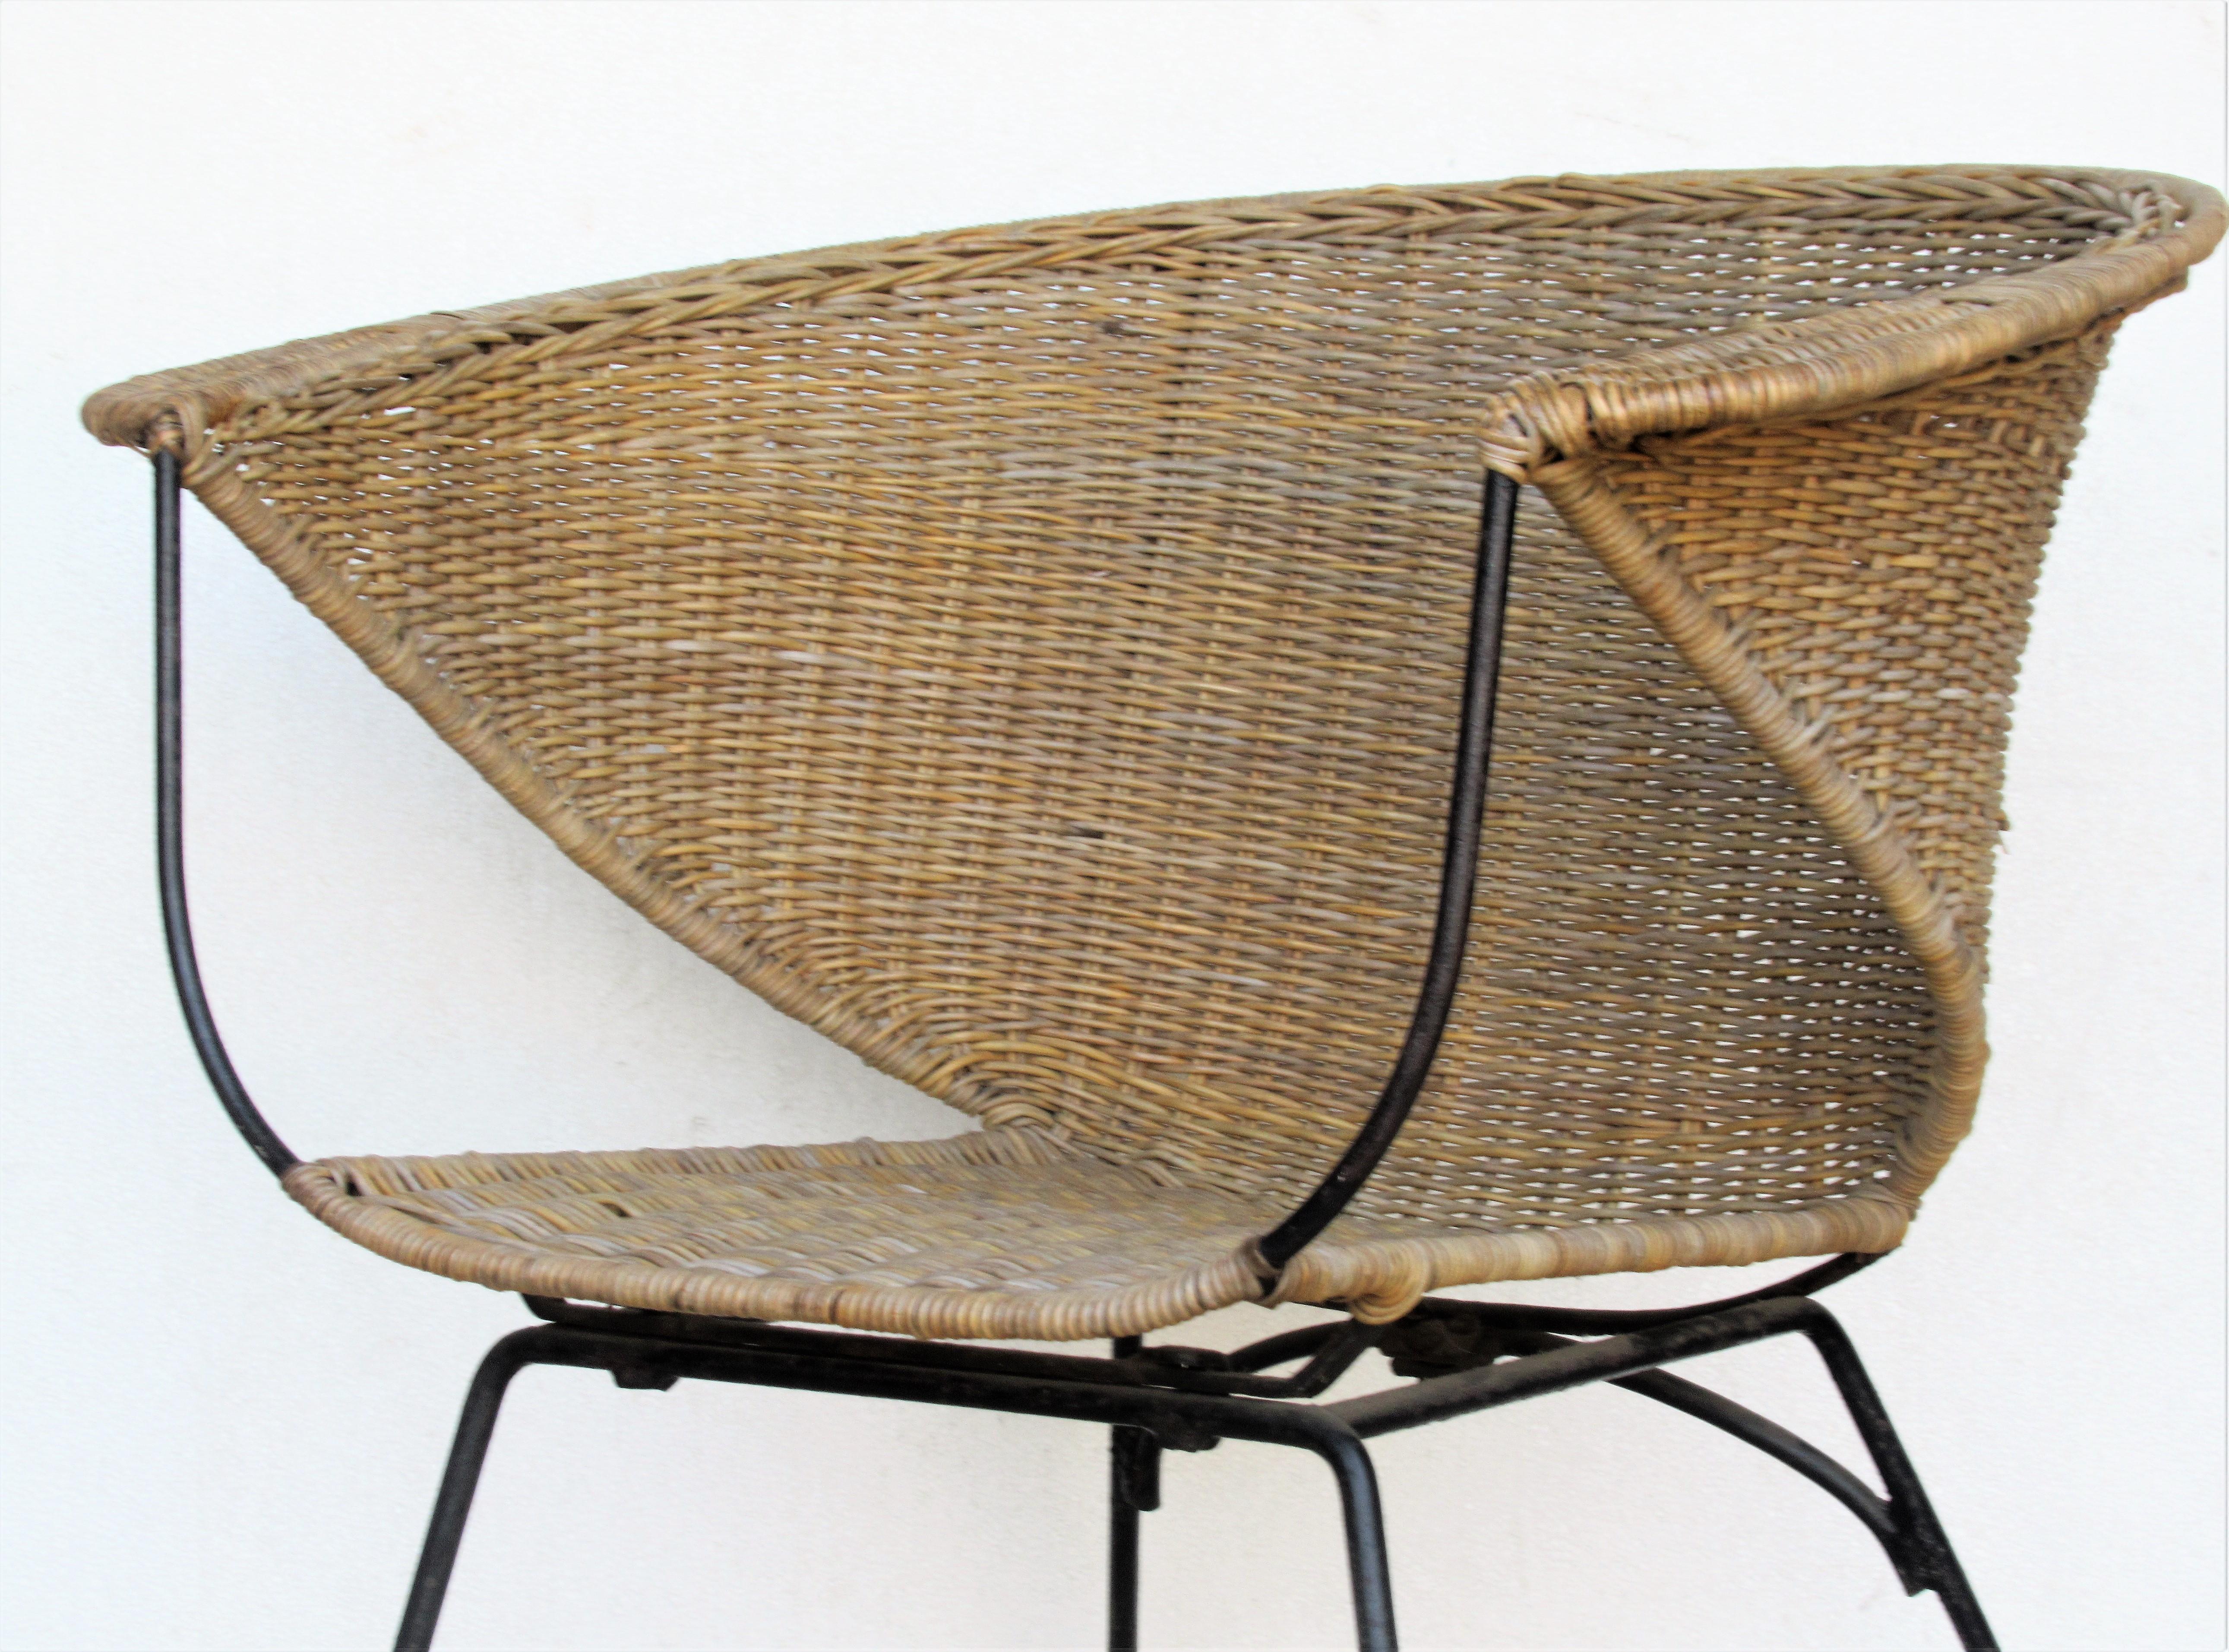  Mid 20th Century Modernist Iron and Rattan Chair 2